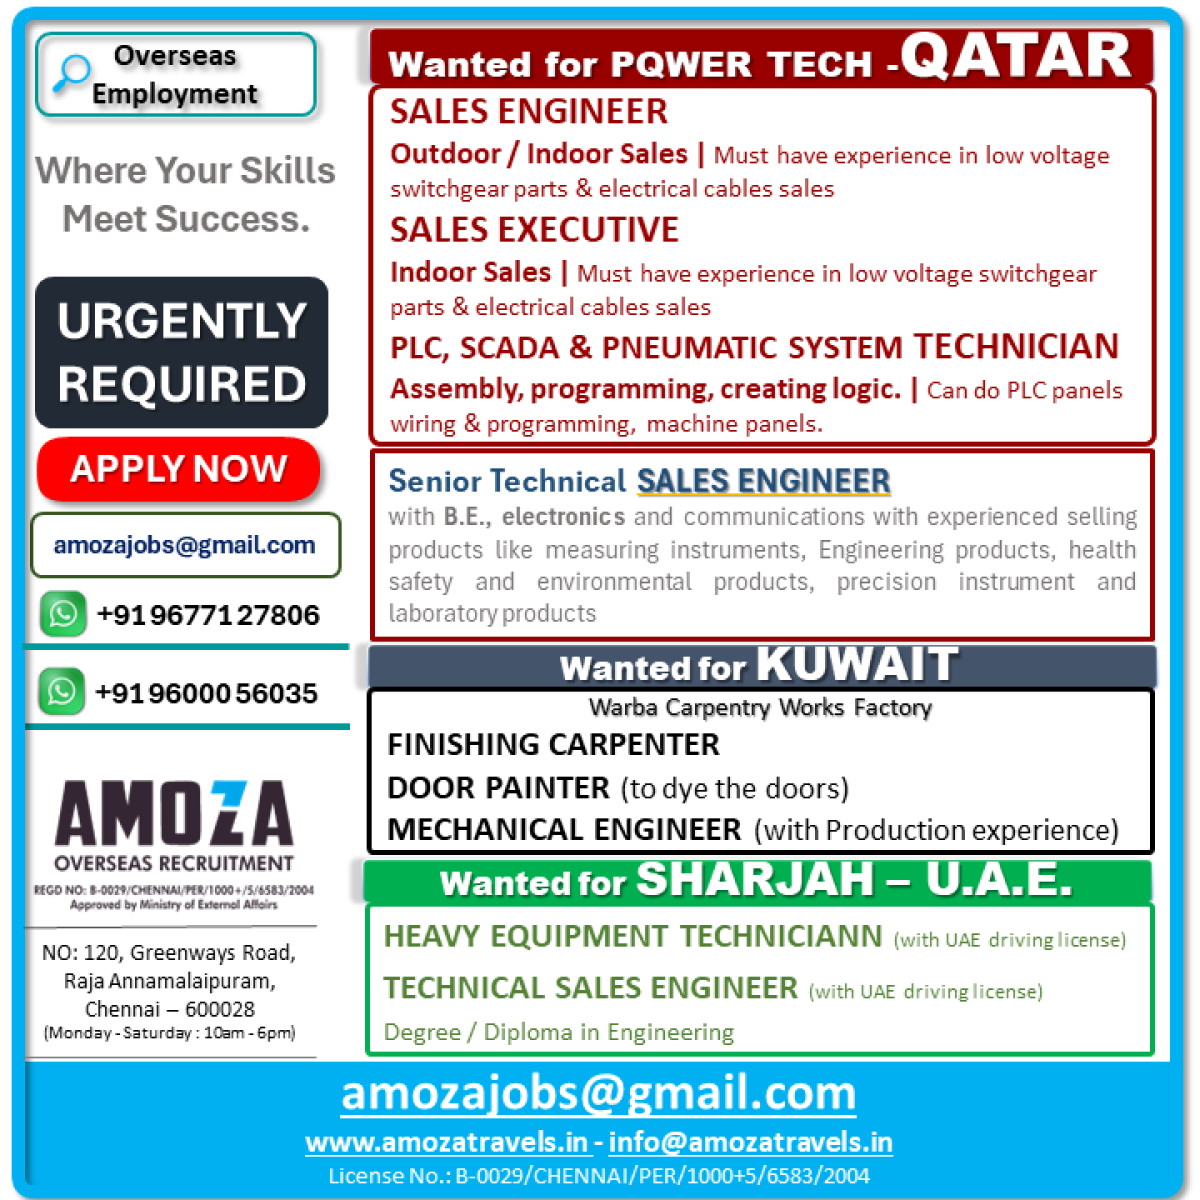 SALES ENGINEERS, SALES EXECUTIVES, HEAVY EQUIPTMENT TECHNICIANS Wanted for QATAR - KUWAIT - U.A.E.